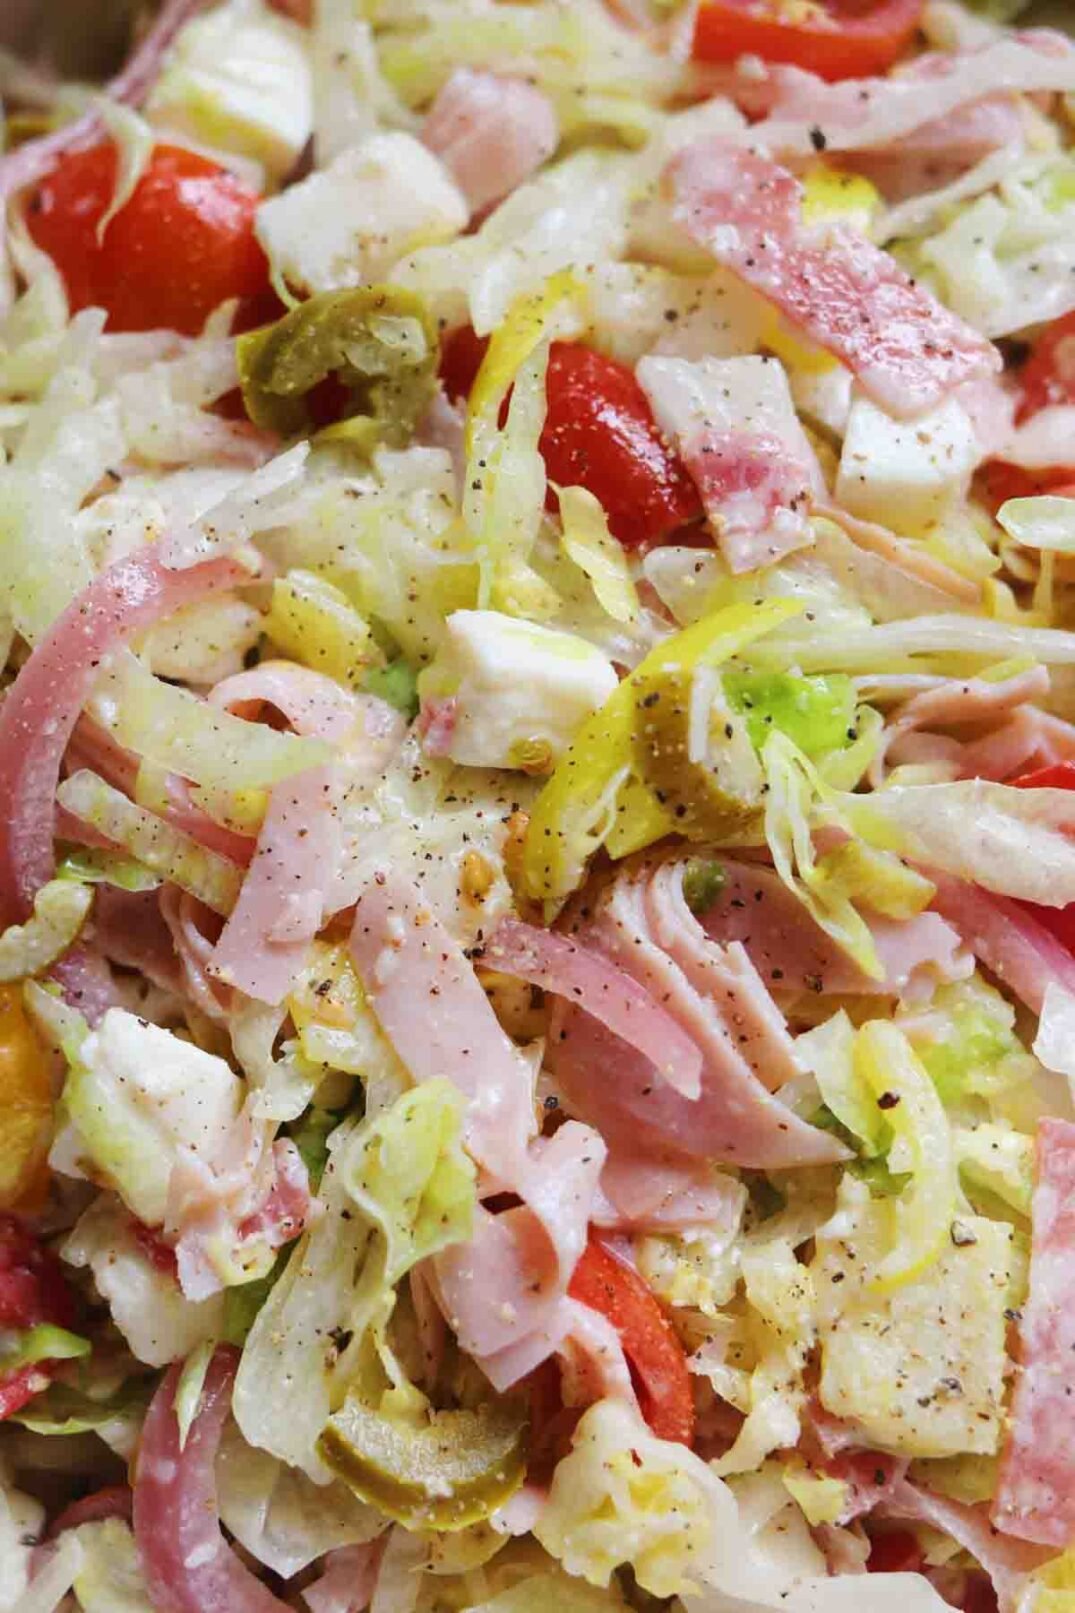 a close up of the colorful ingredients in a grinder salad.